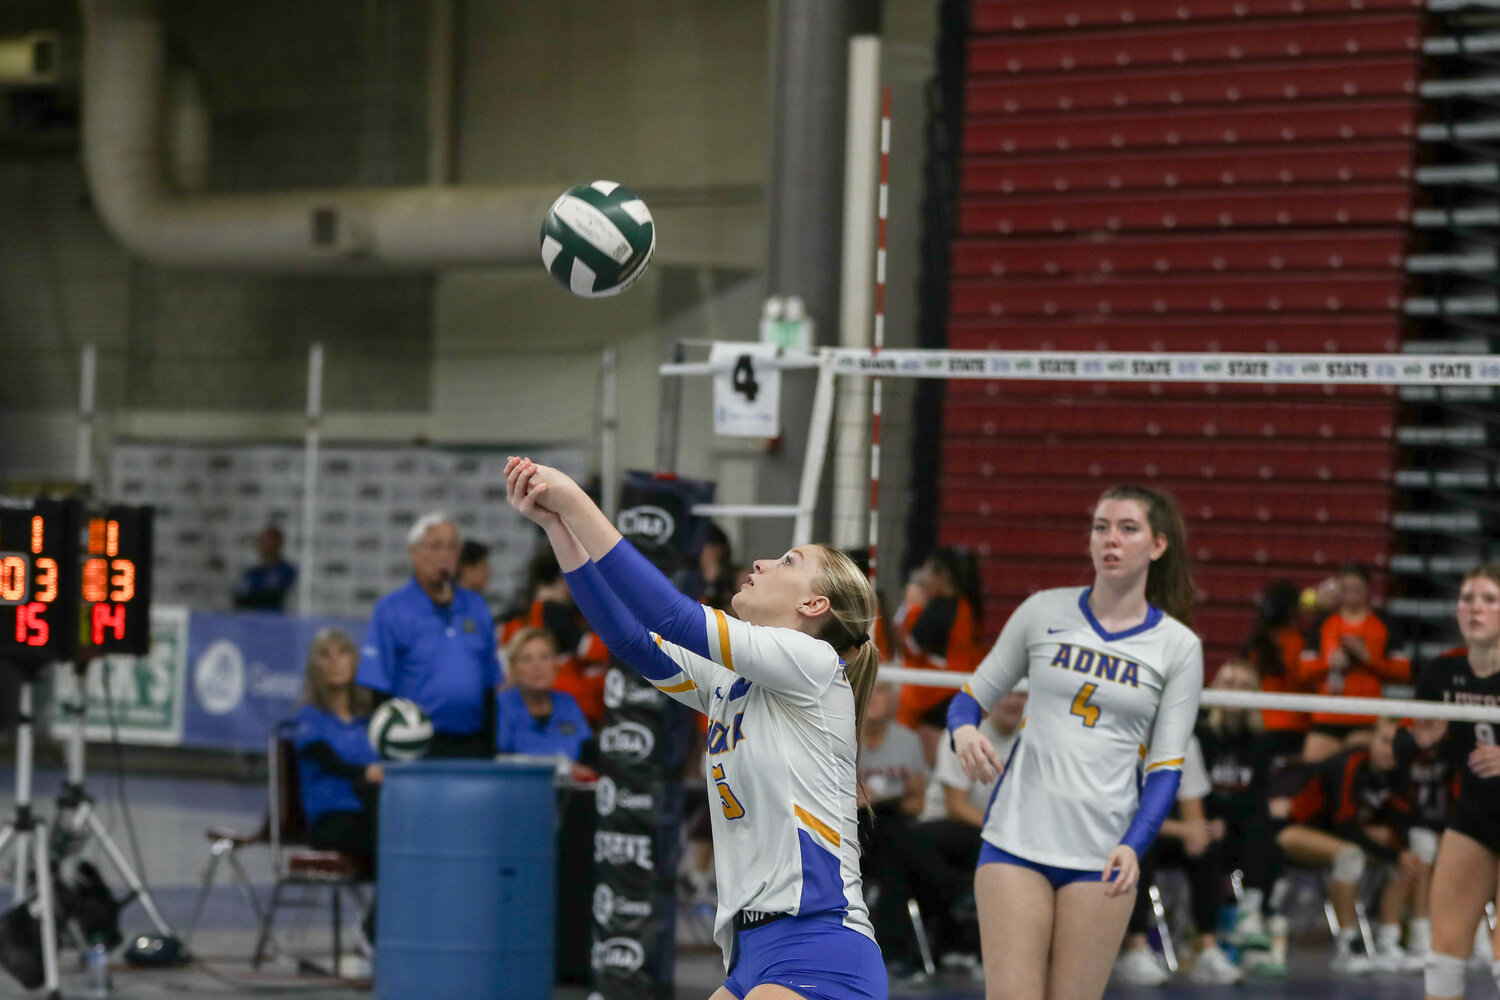 Gaby Guard bumps the ball over her head during a match at the state tournament on Nov. 9 in Yakima.